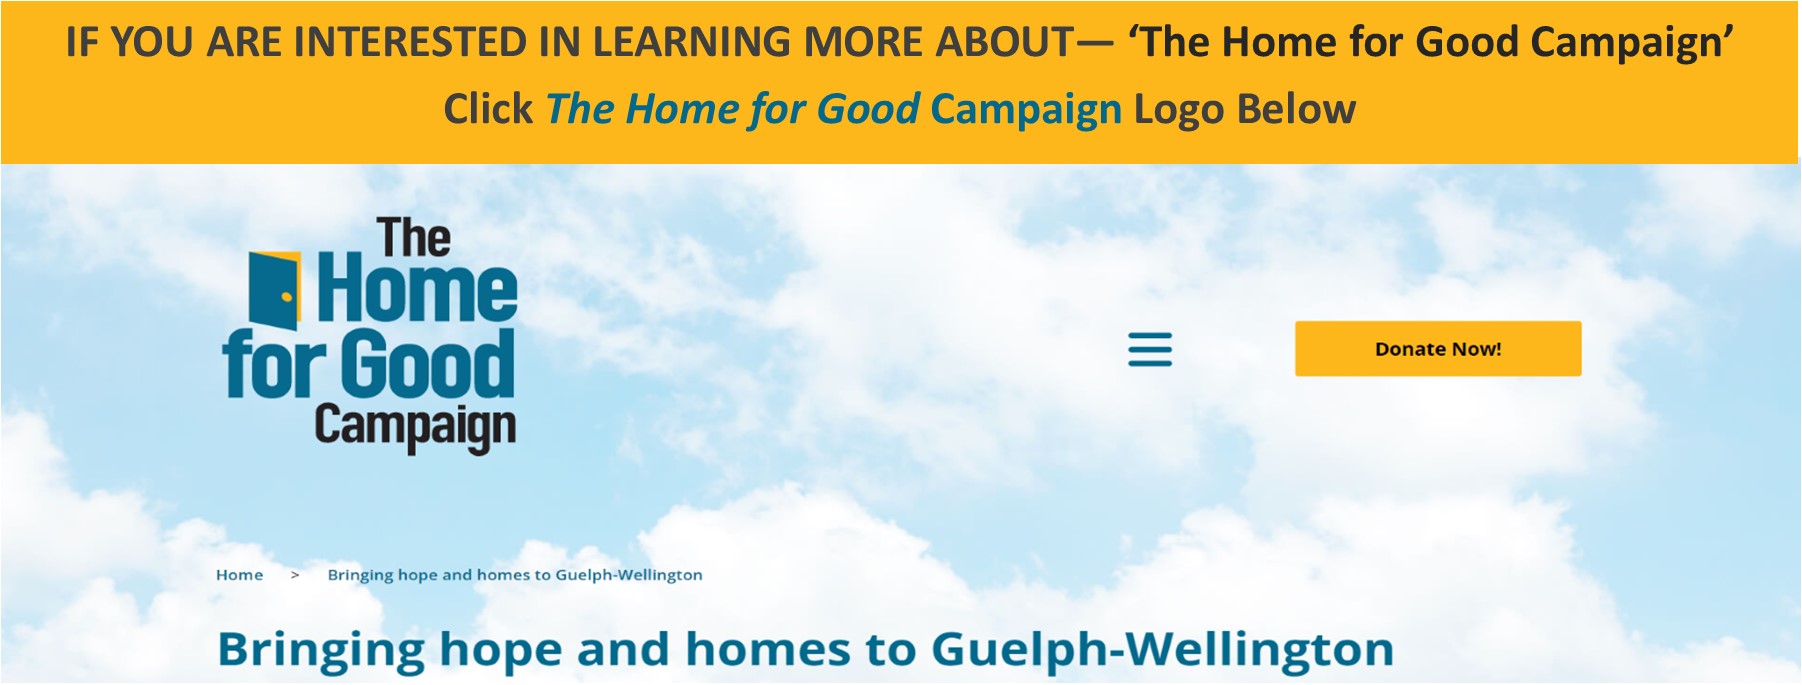 The Home for Good Campaign